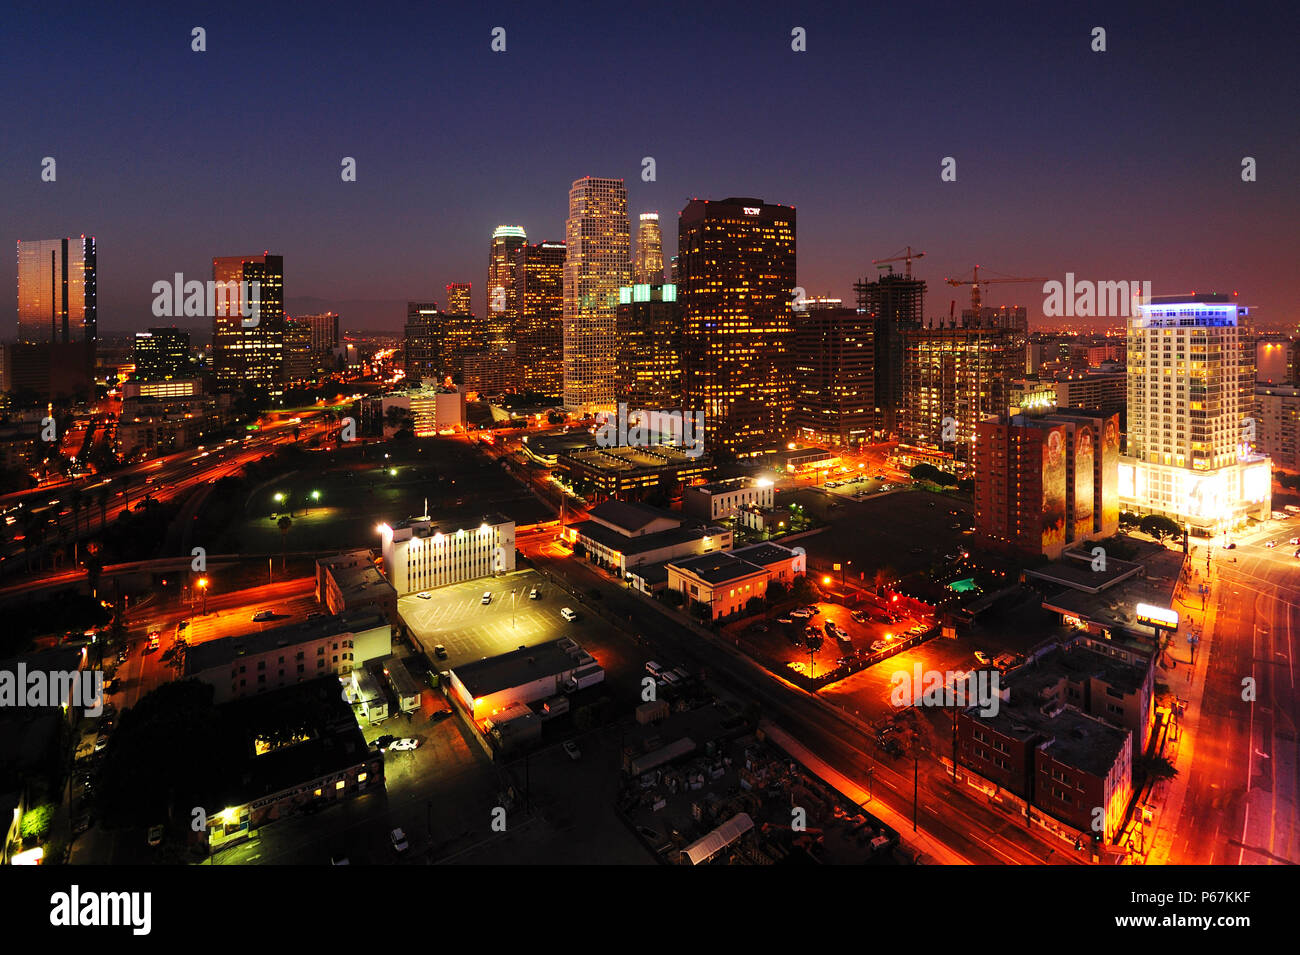 Construction of LA Live in Downtown Los Angeles, California, USA Stock Photo